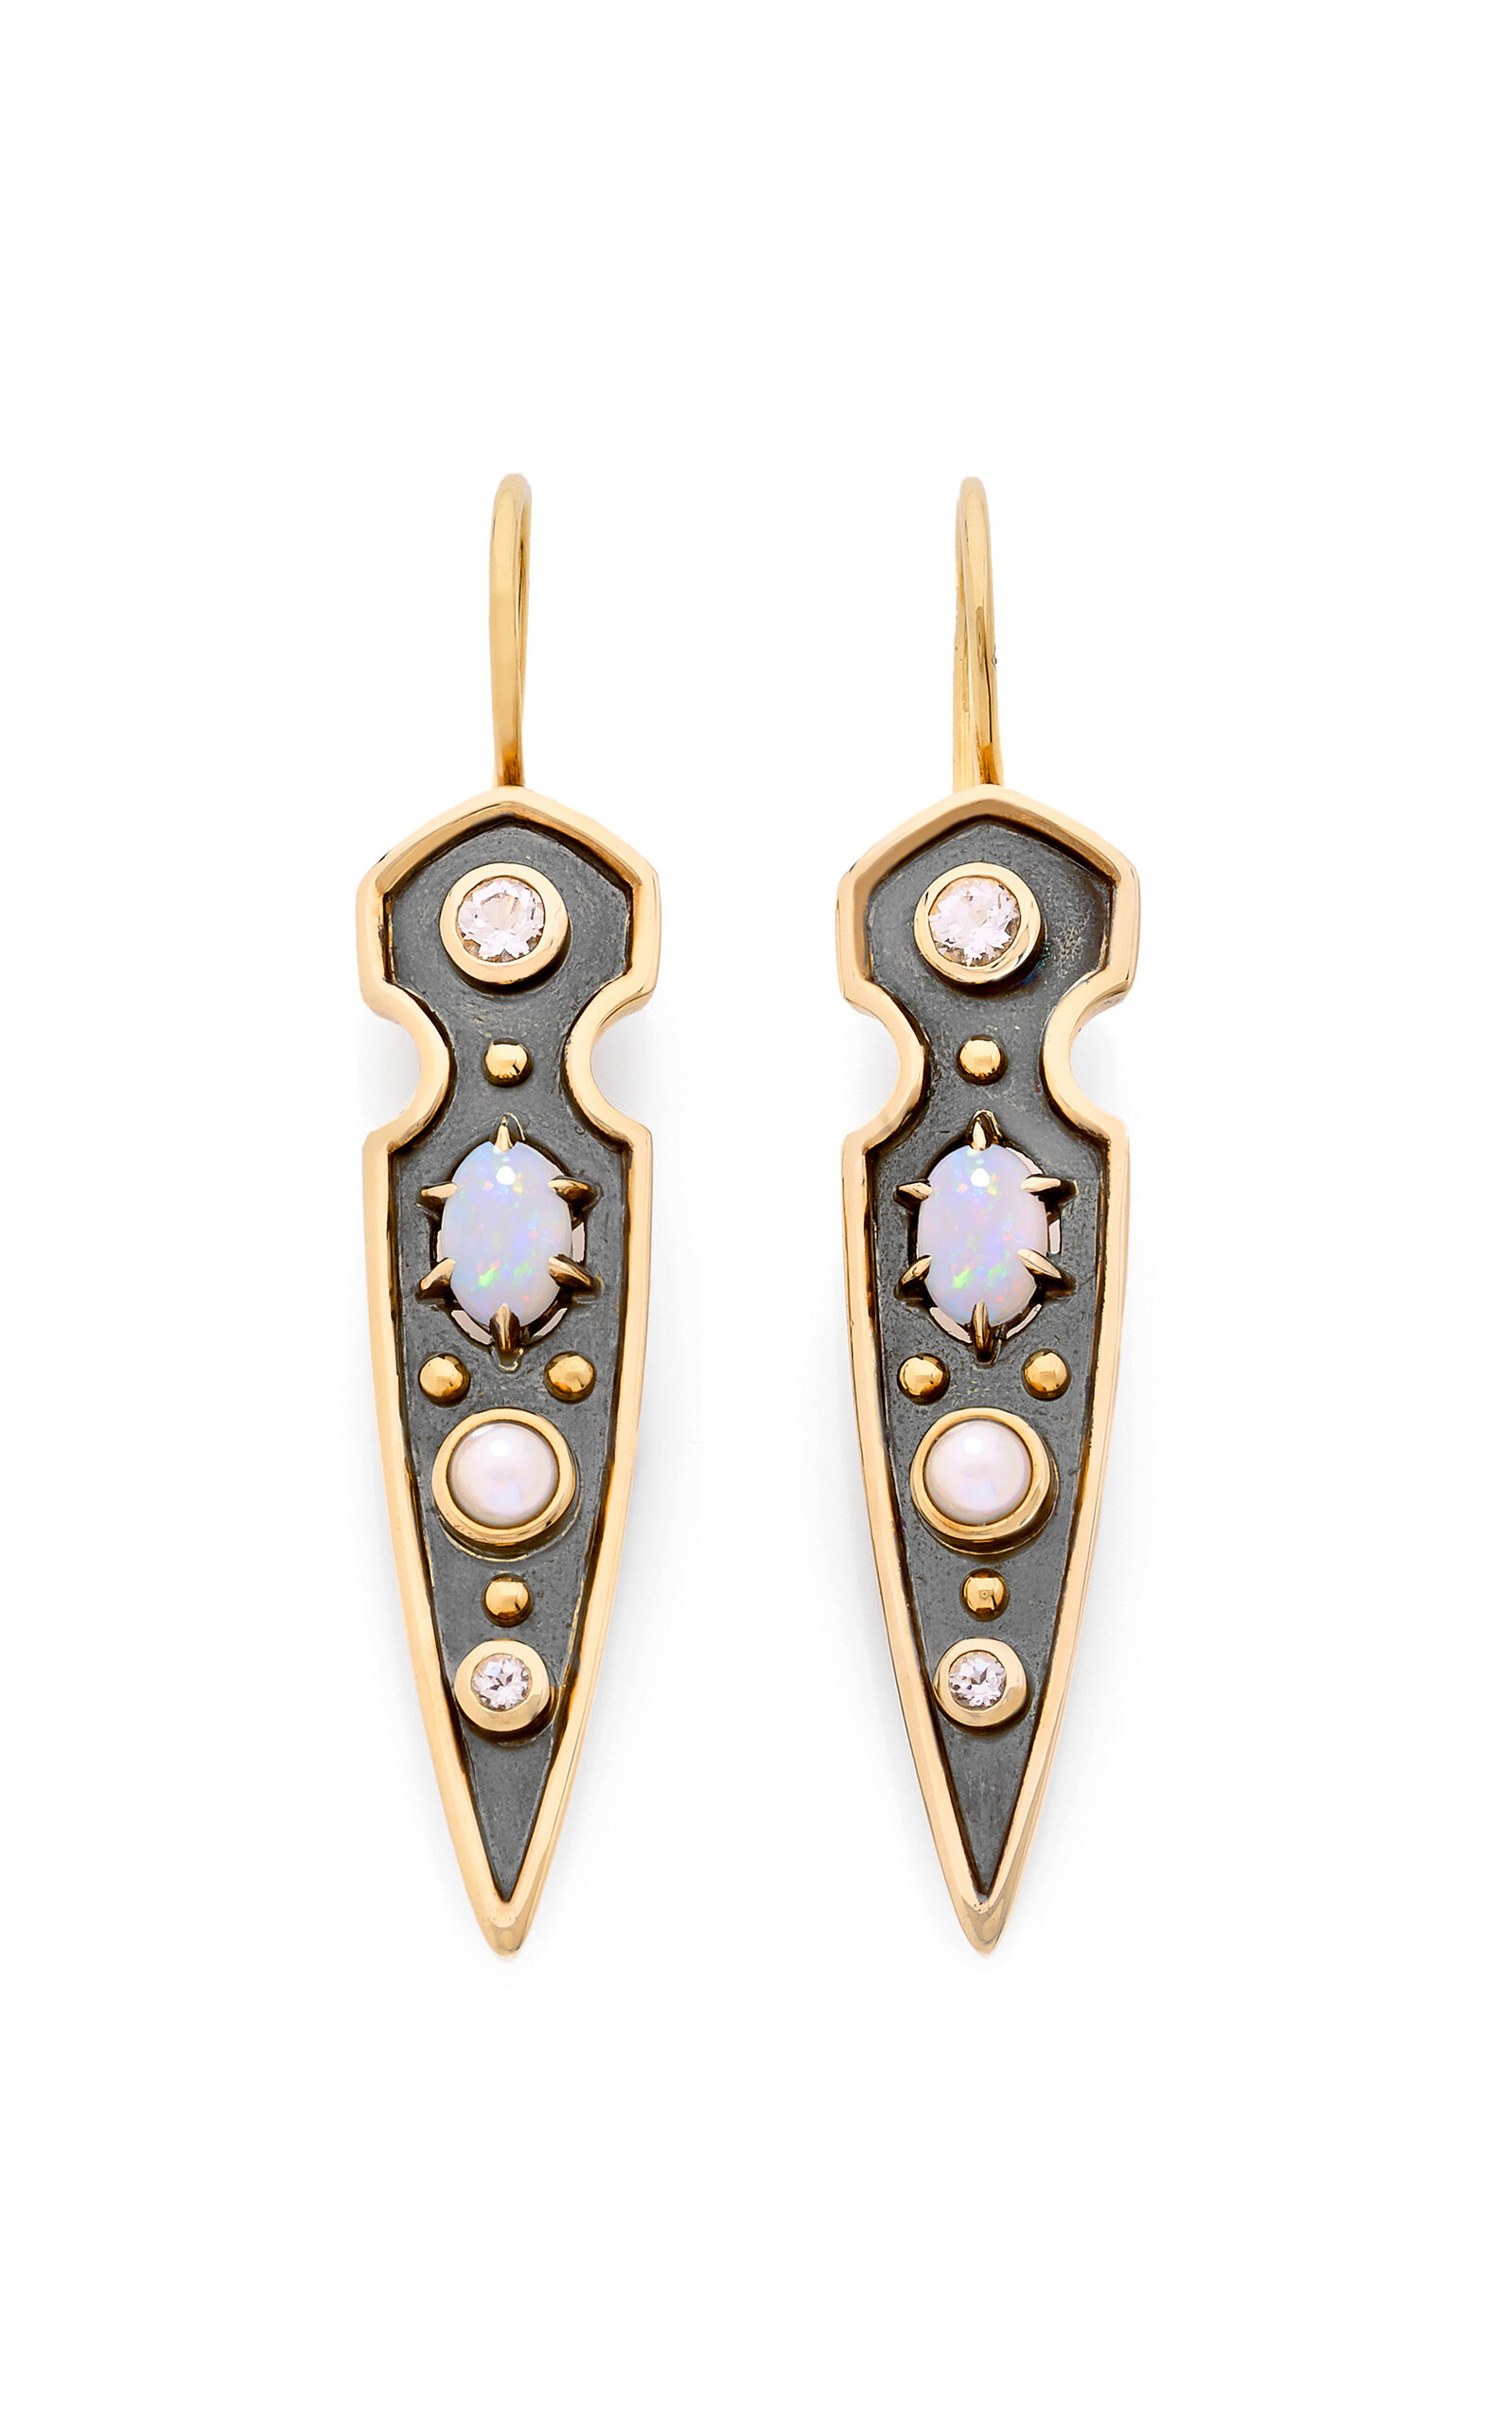 Stylet 18K Yellow Gold; Distressed Silver Opal Earrings